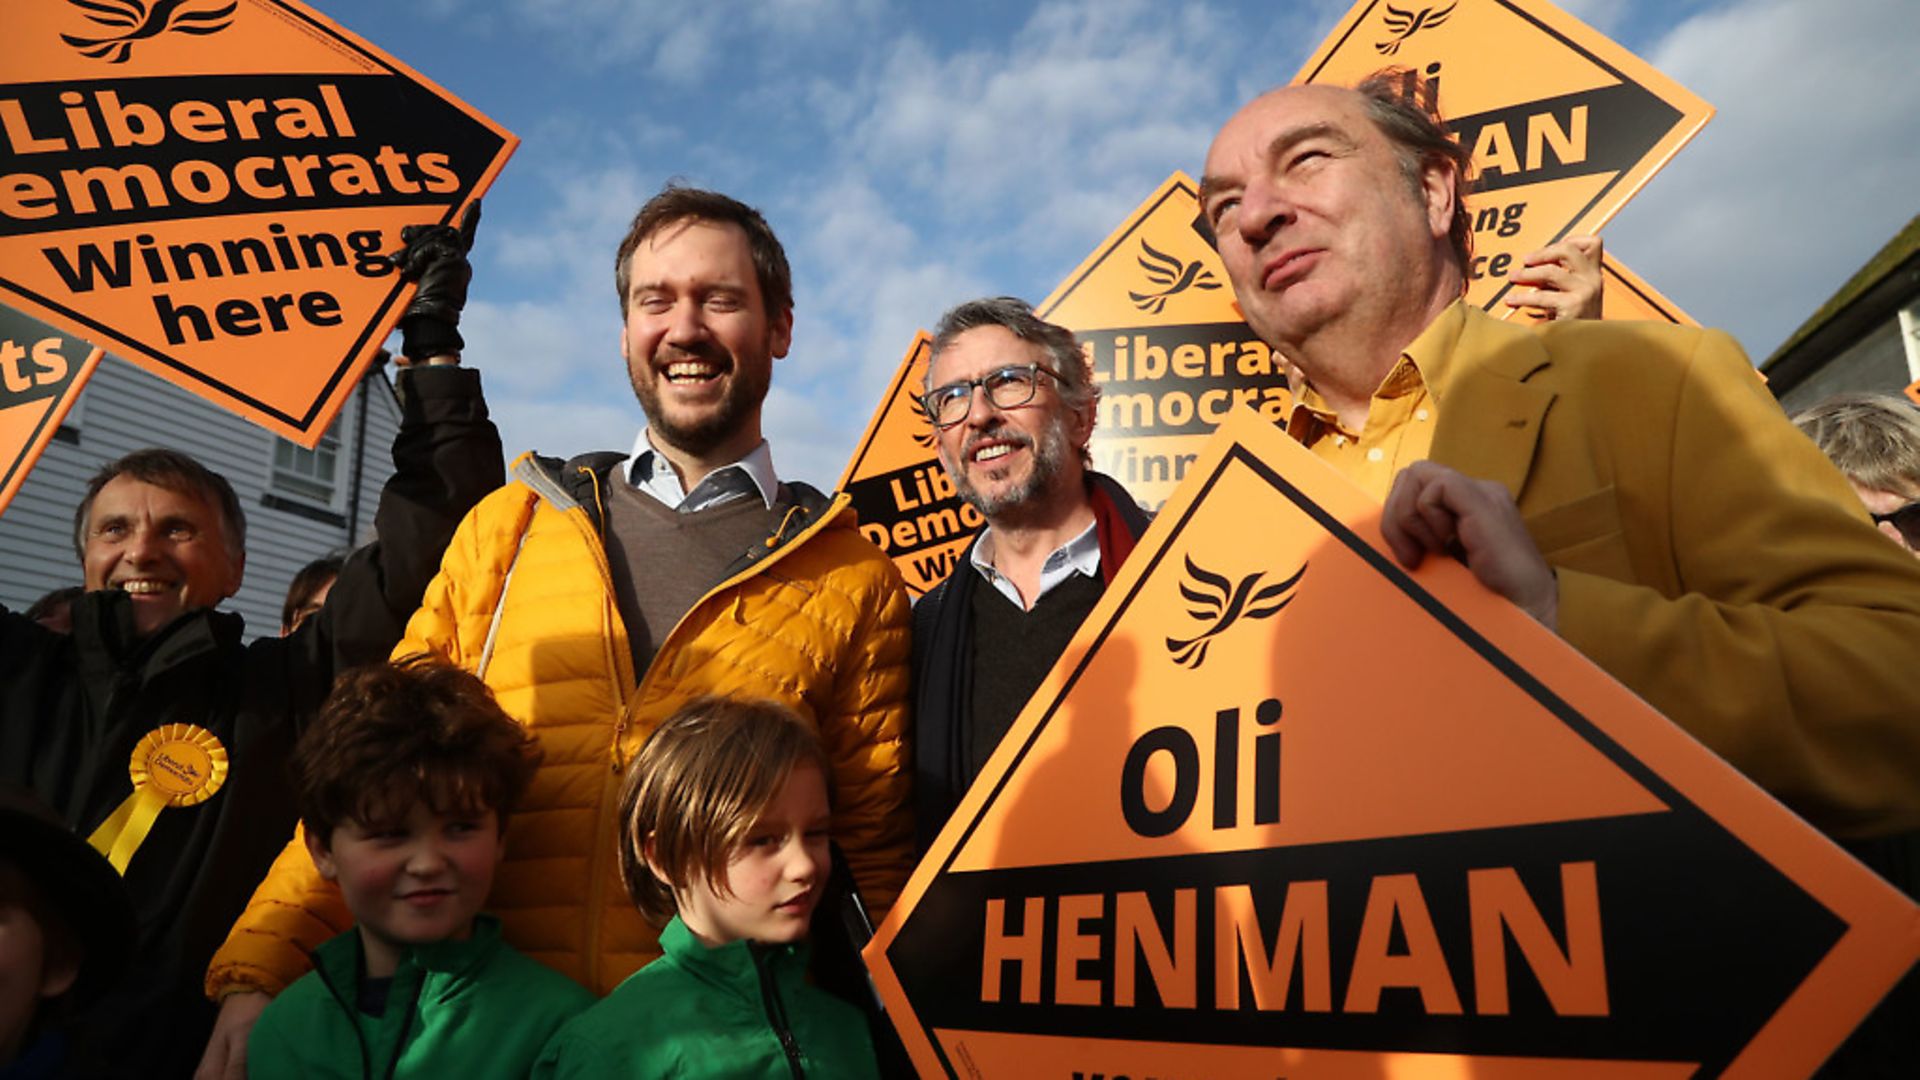 Actor Steve Coogan canvassing in Lewes, in the Lewes constituency with Liberal Democrat candidate Oliver Henman. Photograph: Gareth Fuller/PA Wire. - Credit: PA